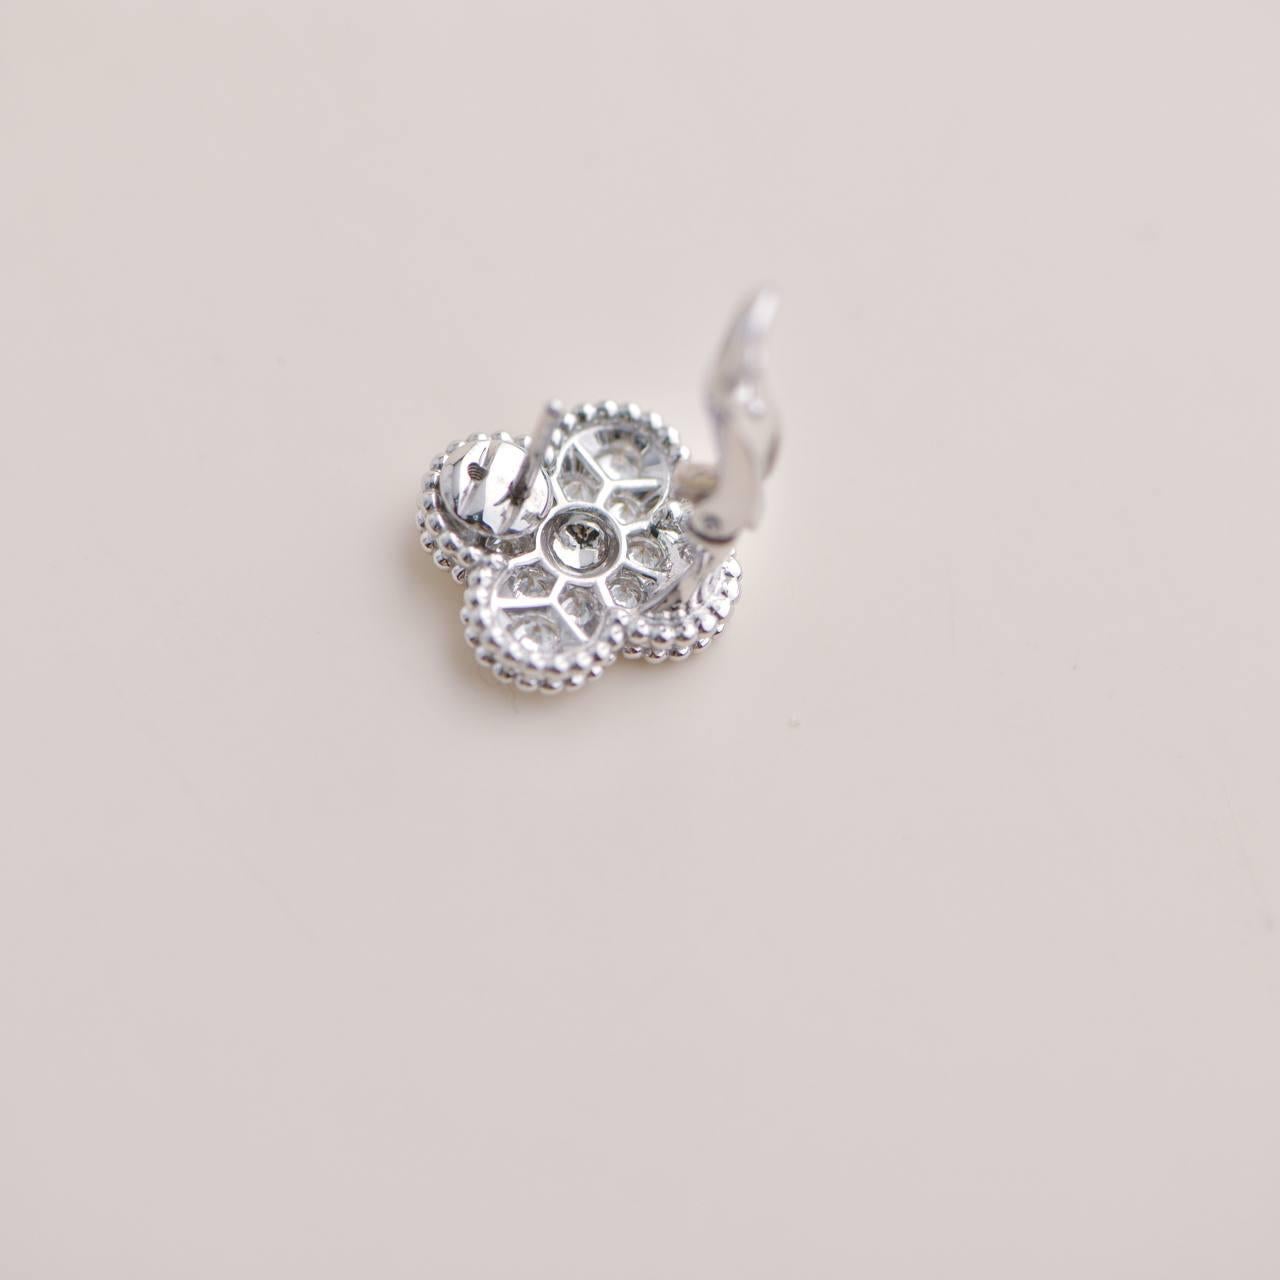 Van Cleef & Arpels Vintage Alhambra Diamond White Gold Earrings In Excellent Condition For Sale In Banbury, GB